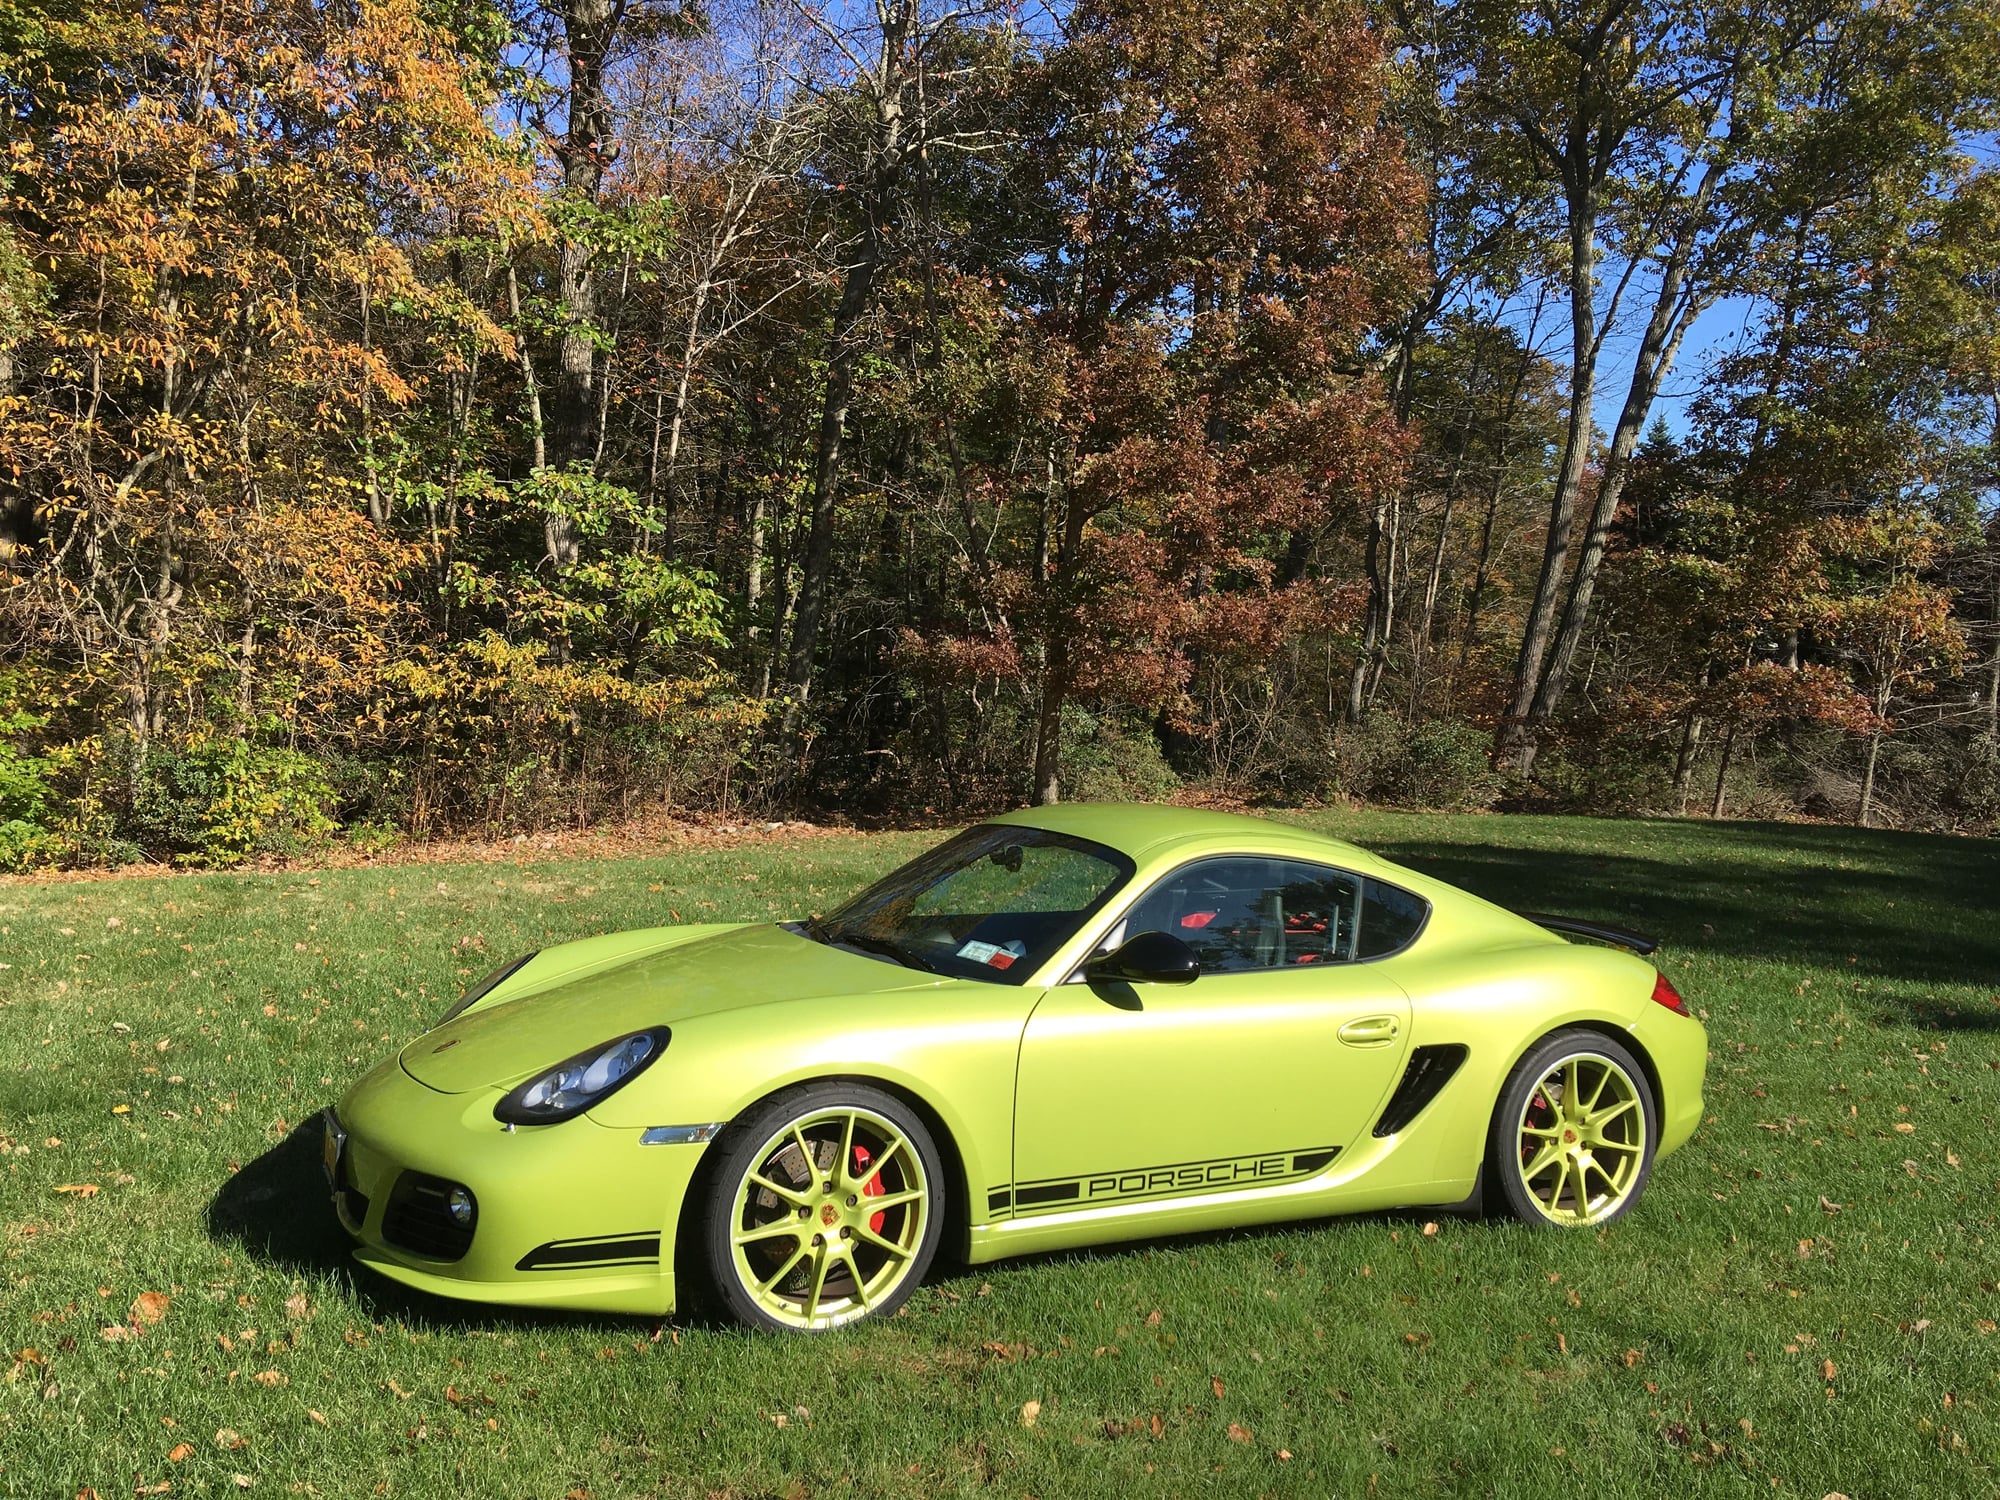 2012 Porsche Cayman - Peridot Cayman R - Used - VIN WP0AB2A82CS793079 - 53,000 Miles - 6 cyl - 2WD - Manual - Coupe - Other - Danbury, CT 06877, United States